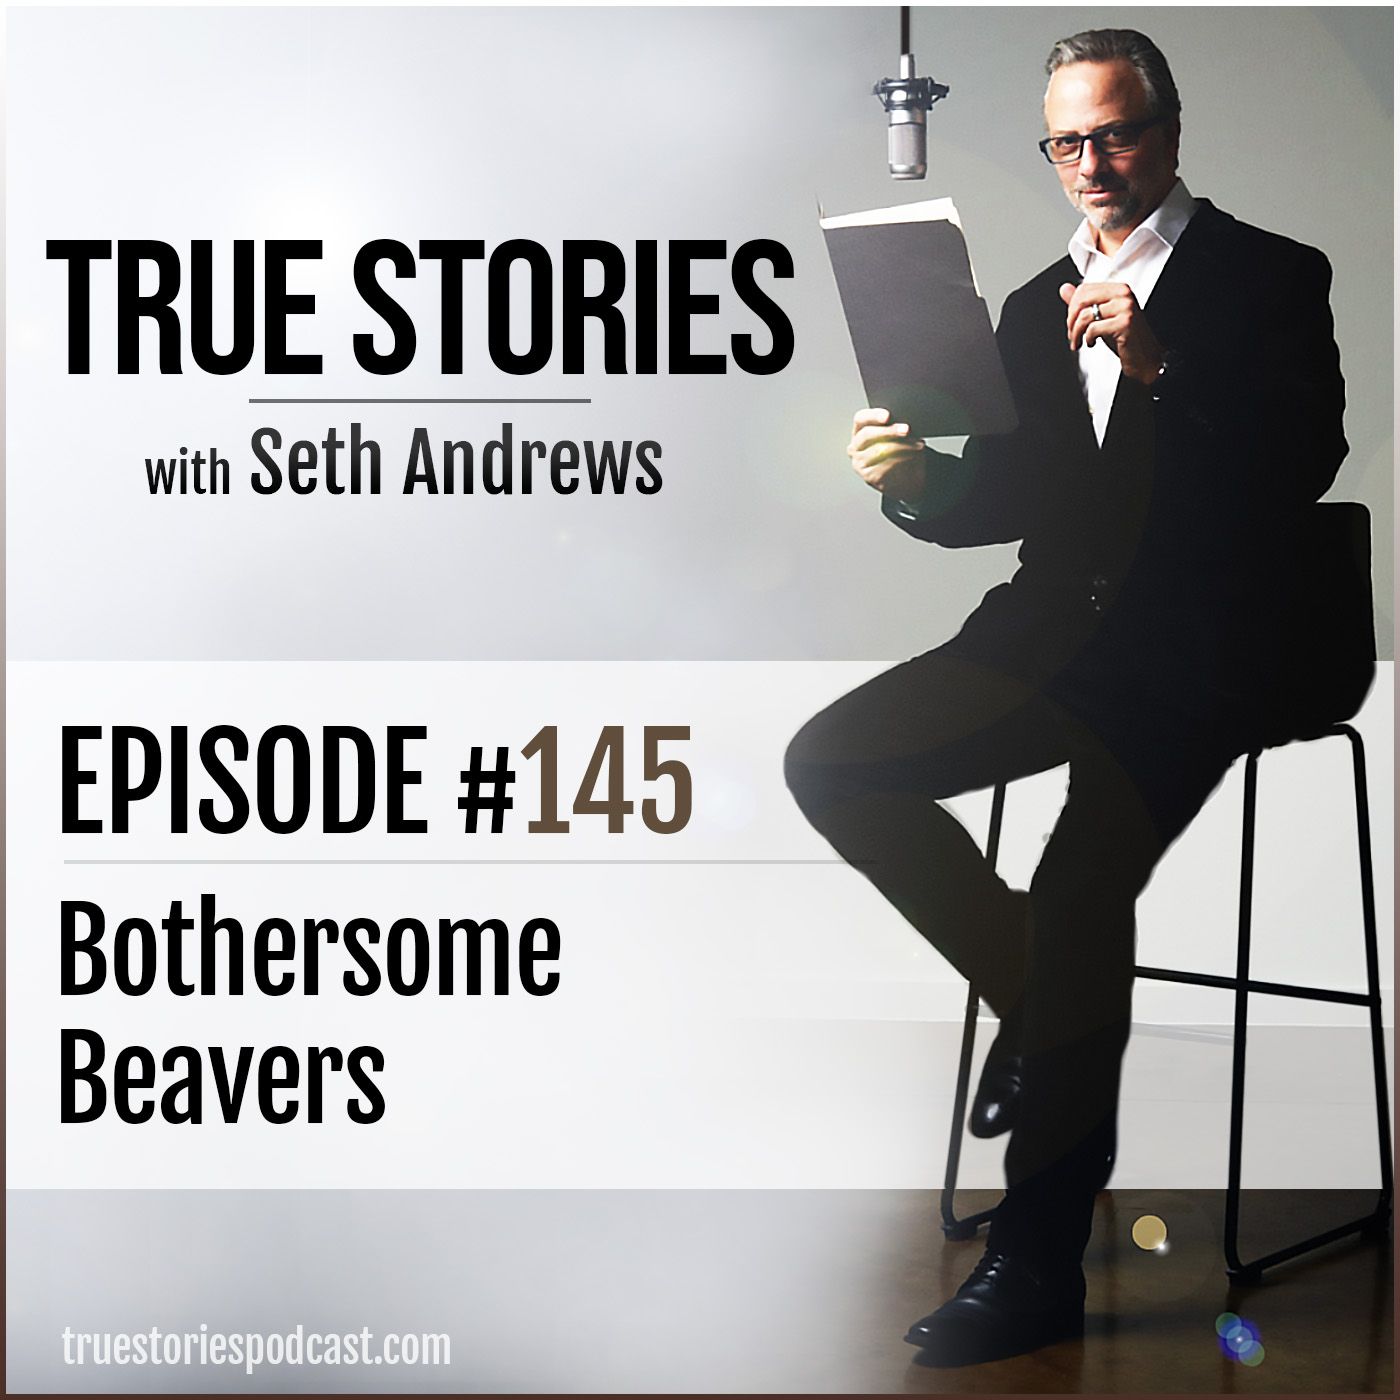 True Stories #145 - Bothersome Beavers